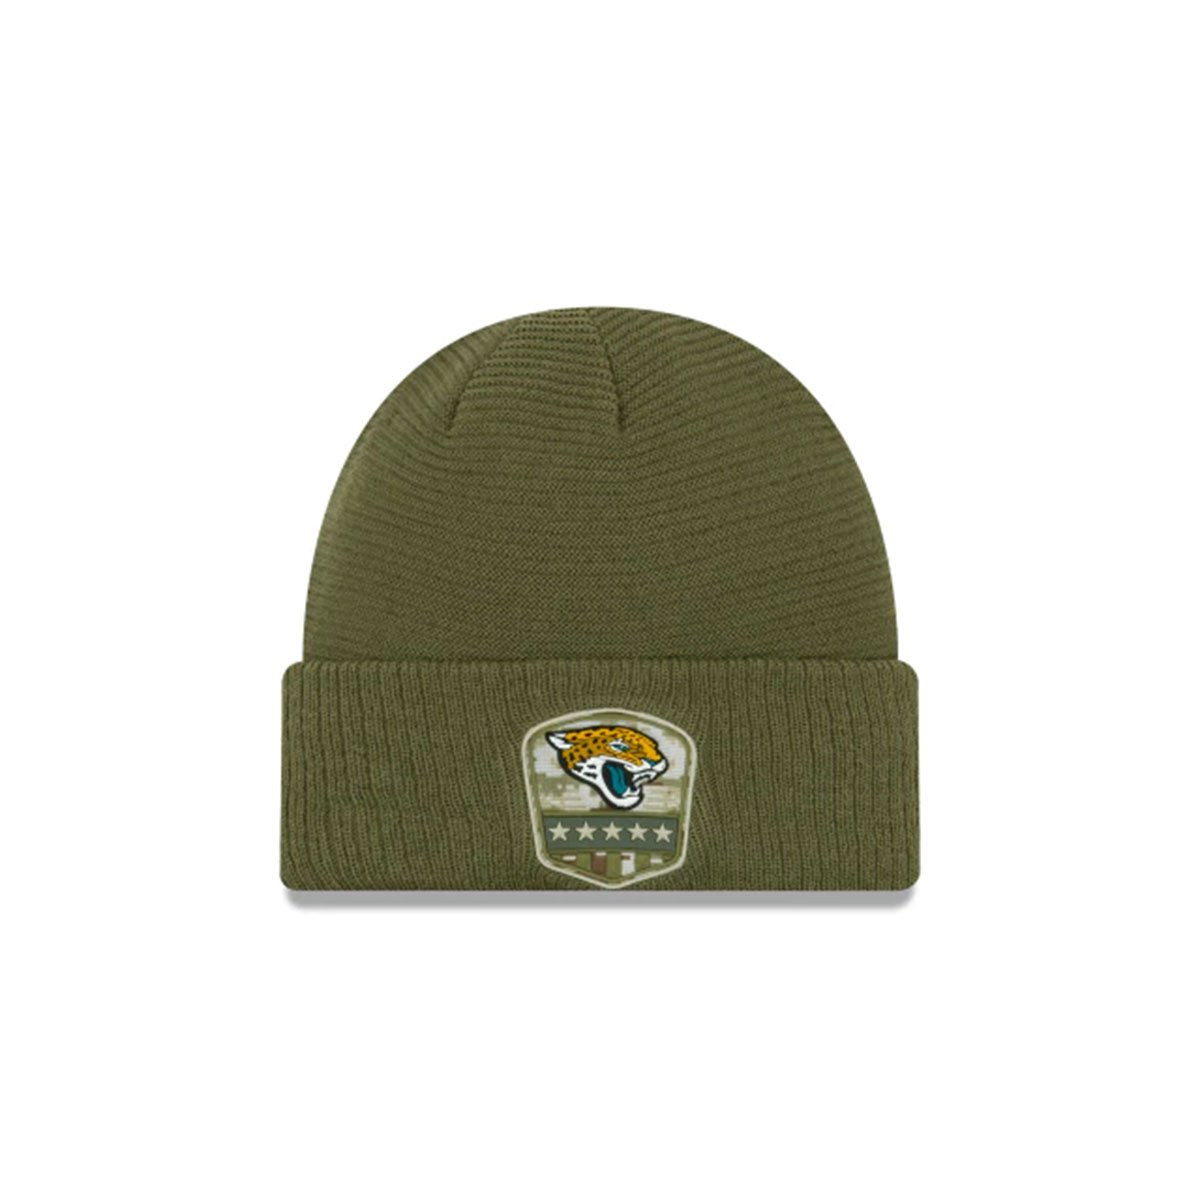 JACKSONVILLE JAGUARS SALUTE TO SERVICE CUFF KNIT GREEN/YELLOW